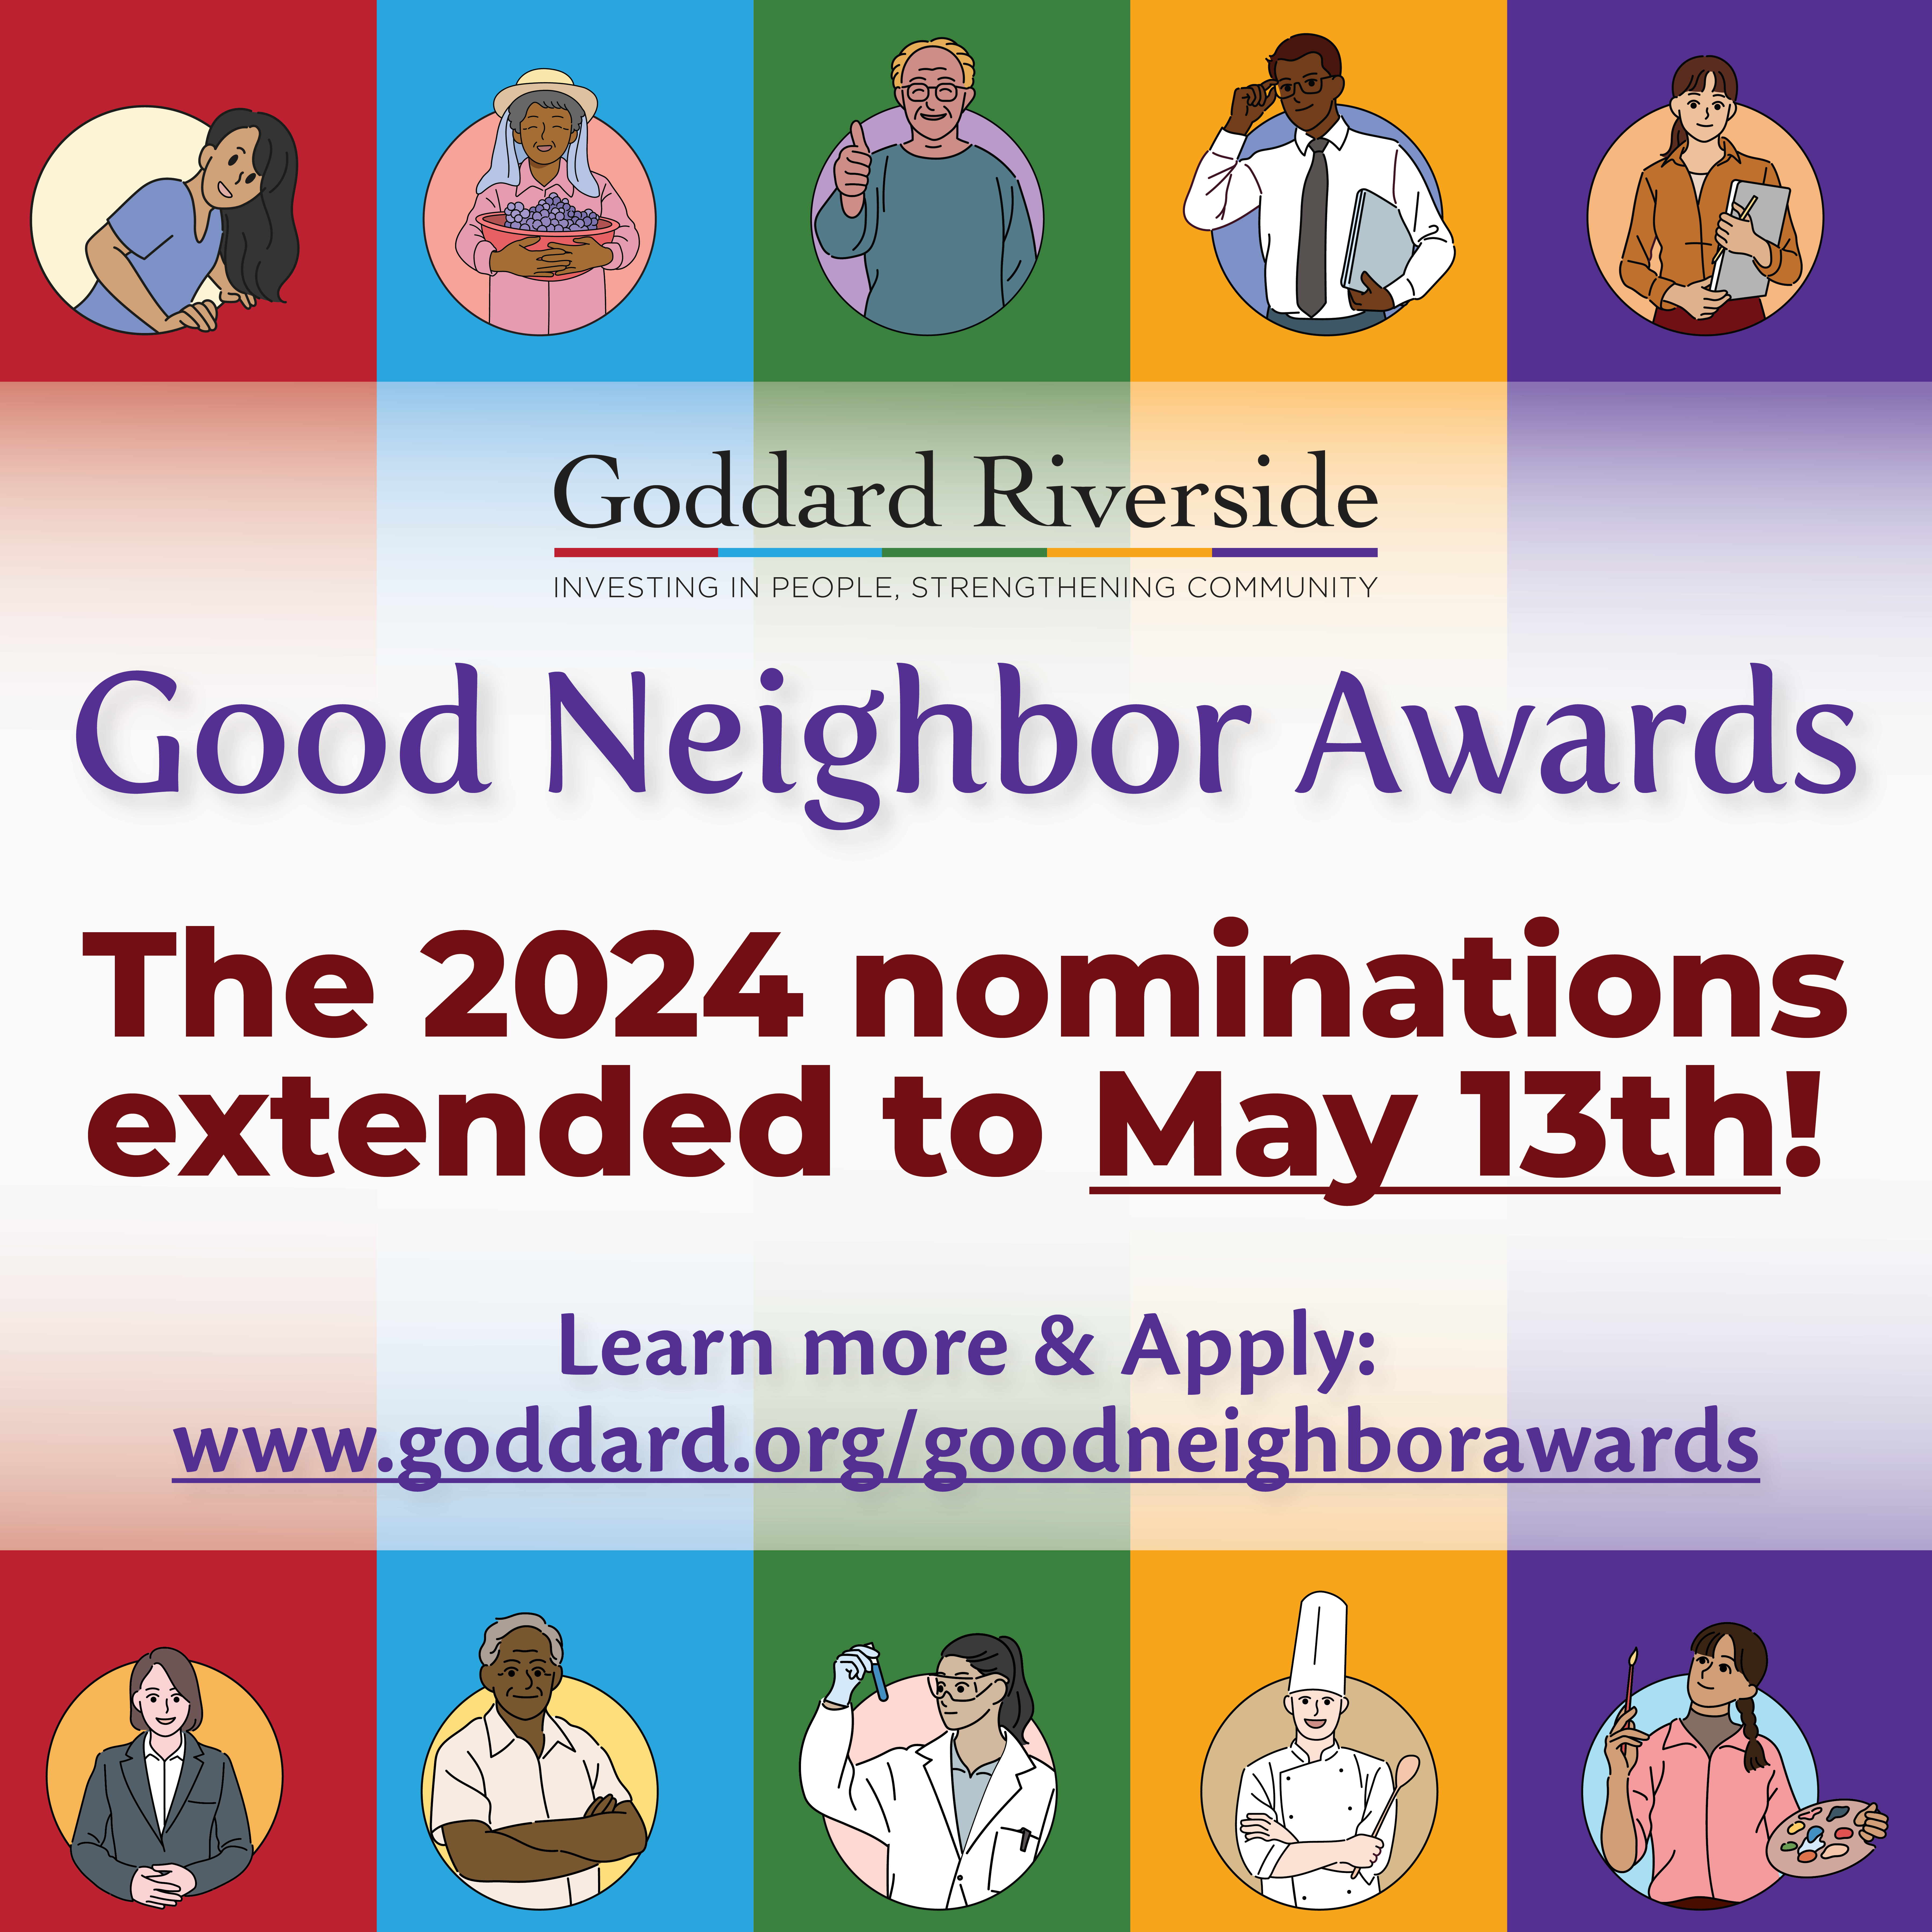 Goddard Riversides Good Neighbor awards Nominations extended to May 13th